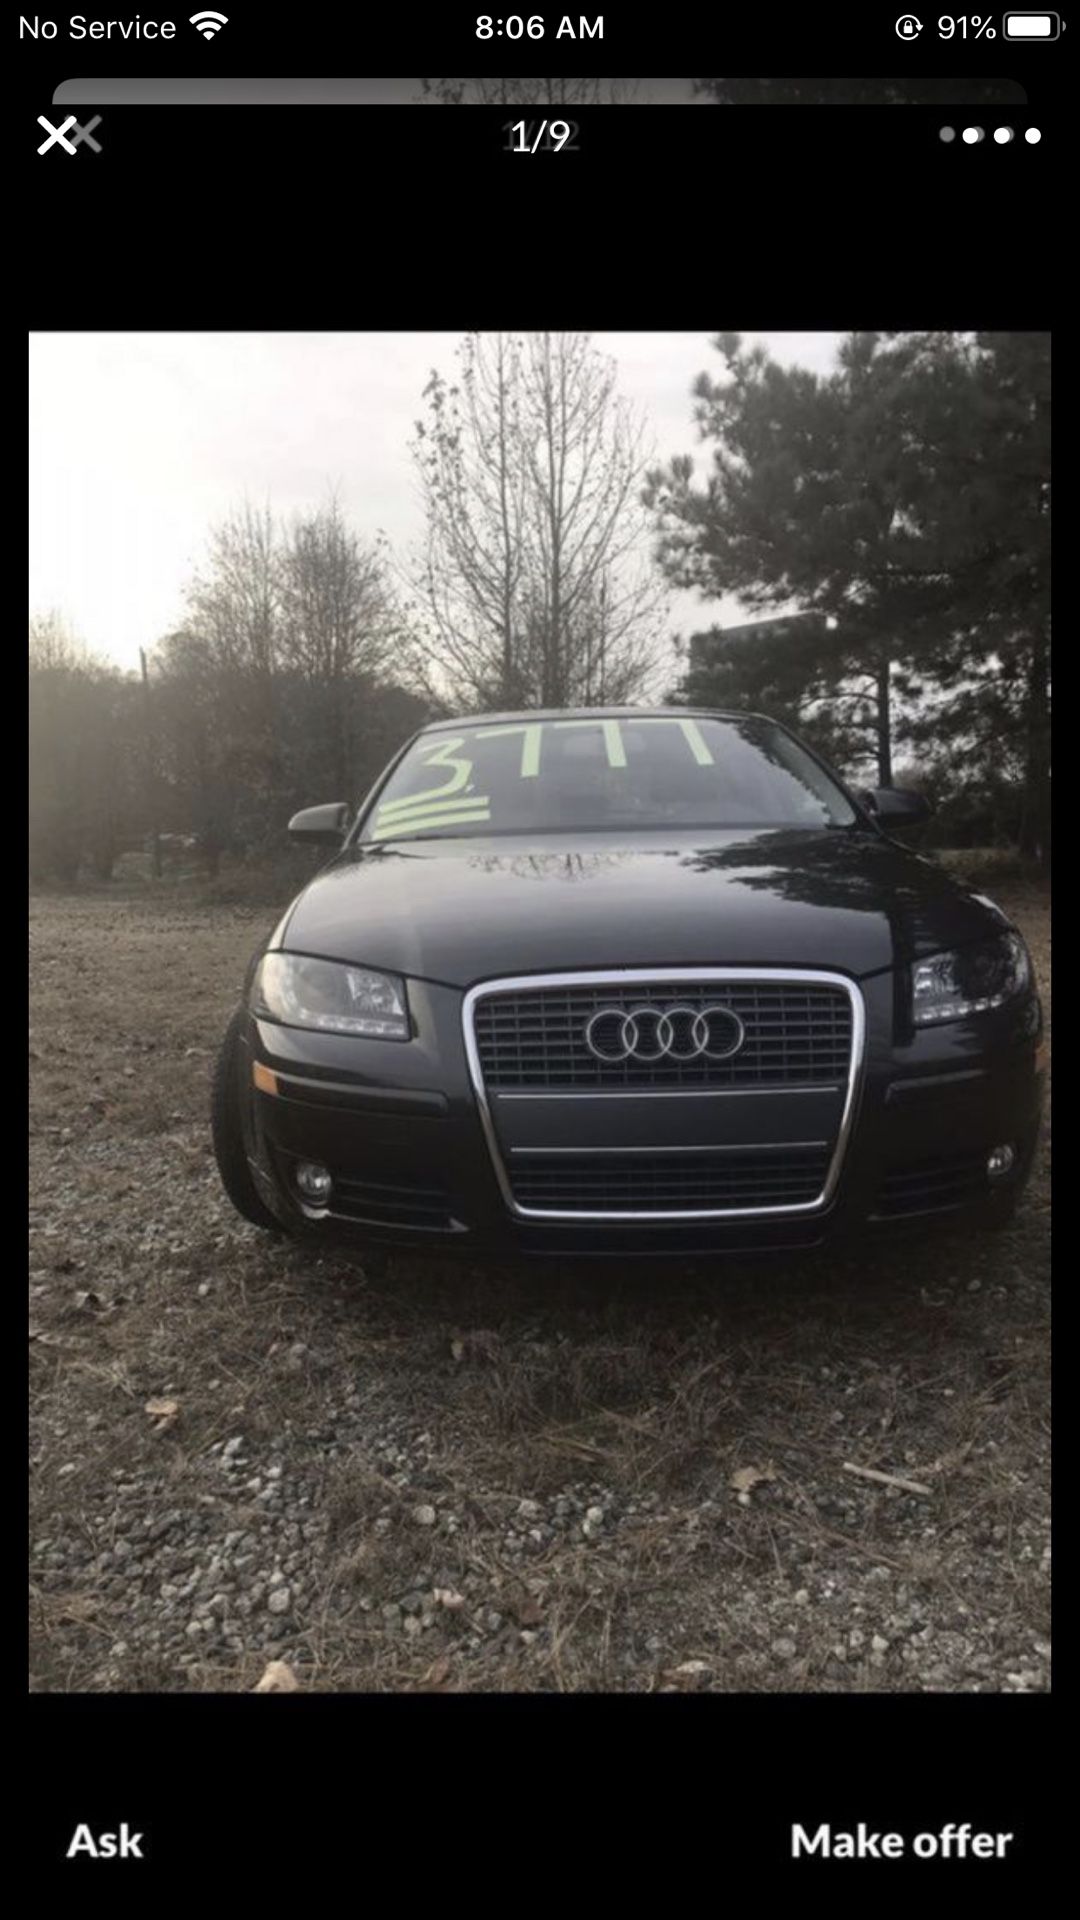 2007 Audi A-3 FWD 2.0 turbocharge with {url removed} heated seats Power Windows, Doors, Mirrored, Alloy Wheels,AM/FM Radio with CD, as well as, Crui